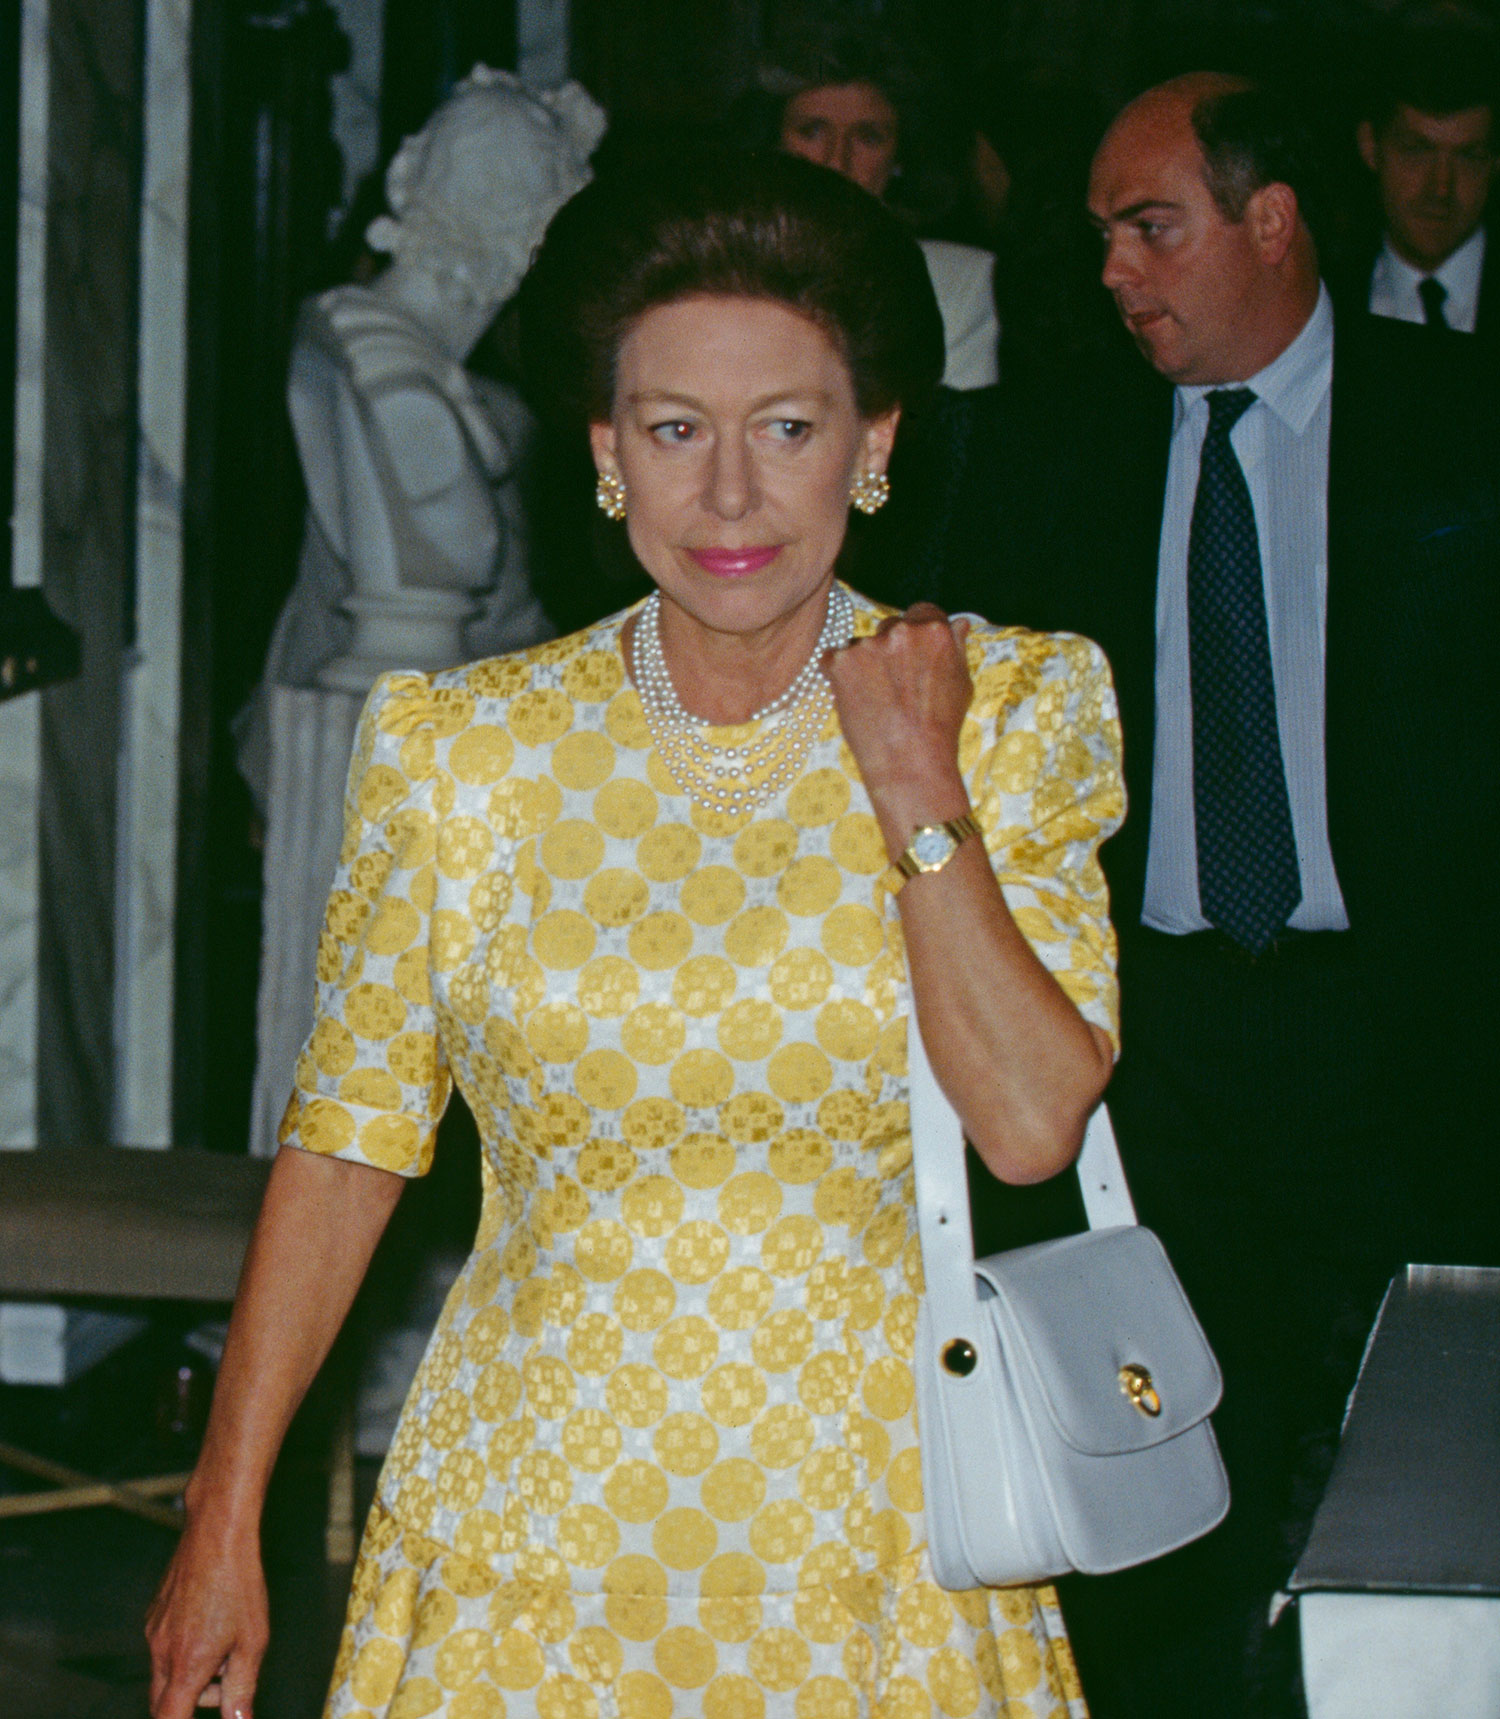 Princess Margaret during an official visit by Nelson Mandela in London, July 4, 1990